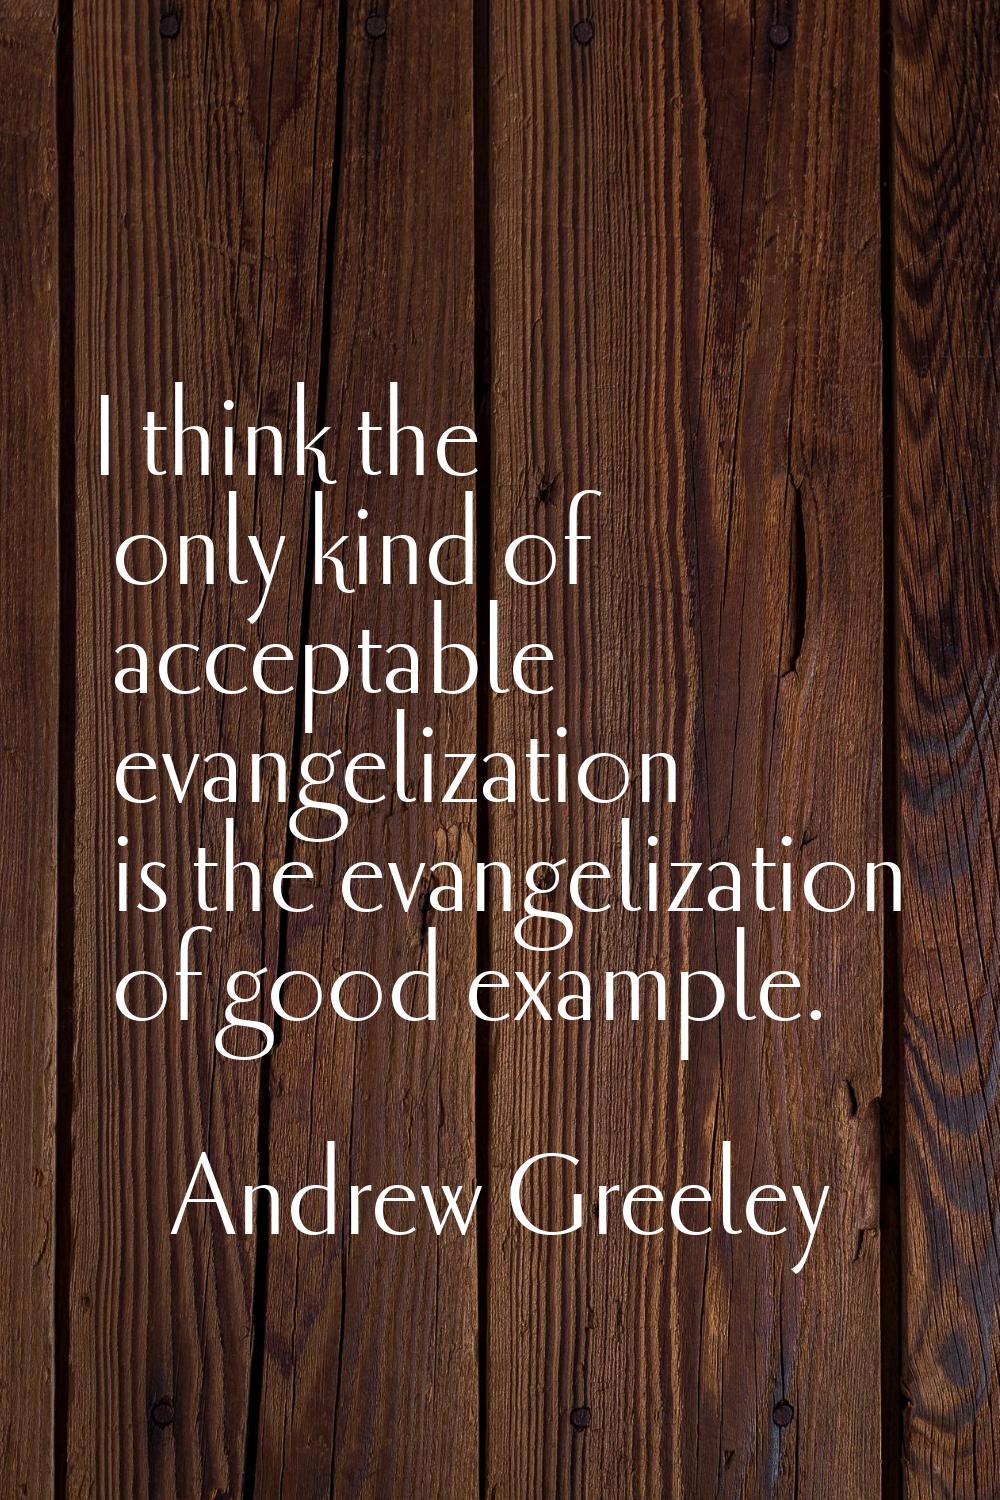 I think the only kind of acceptable evangelization is the evangelization of good example.